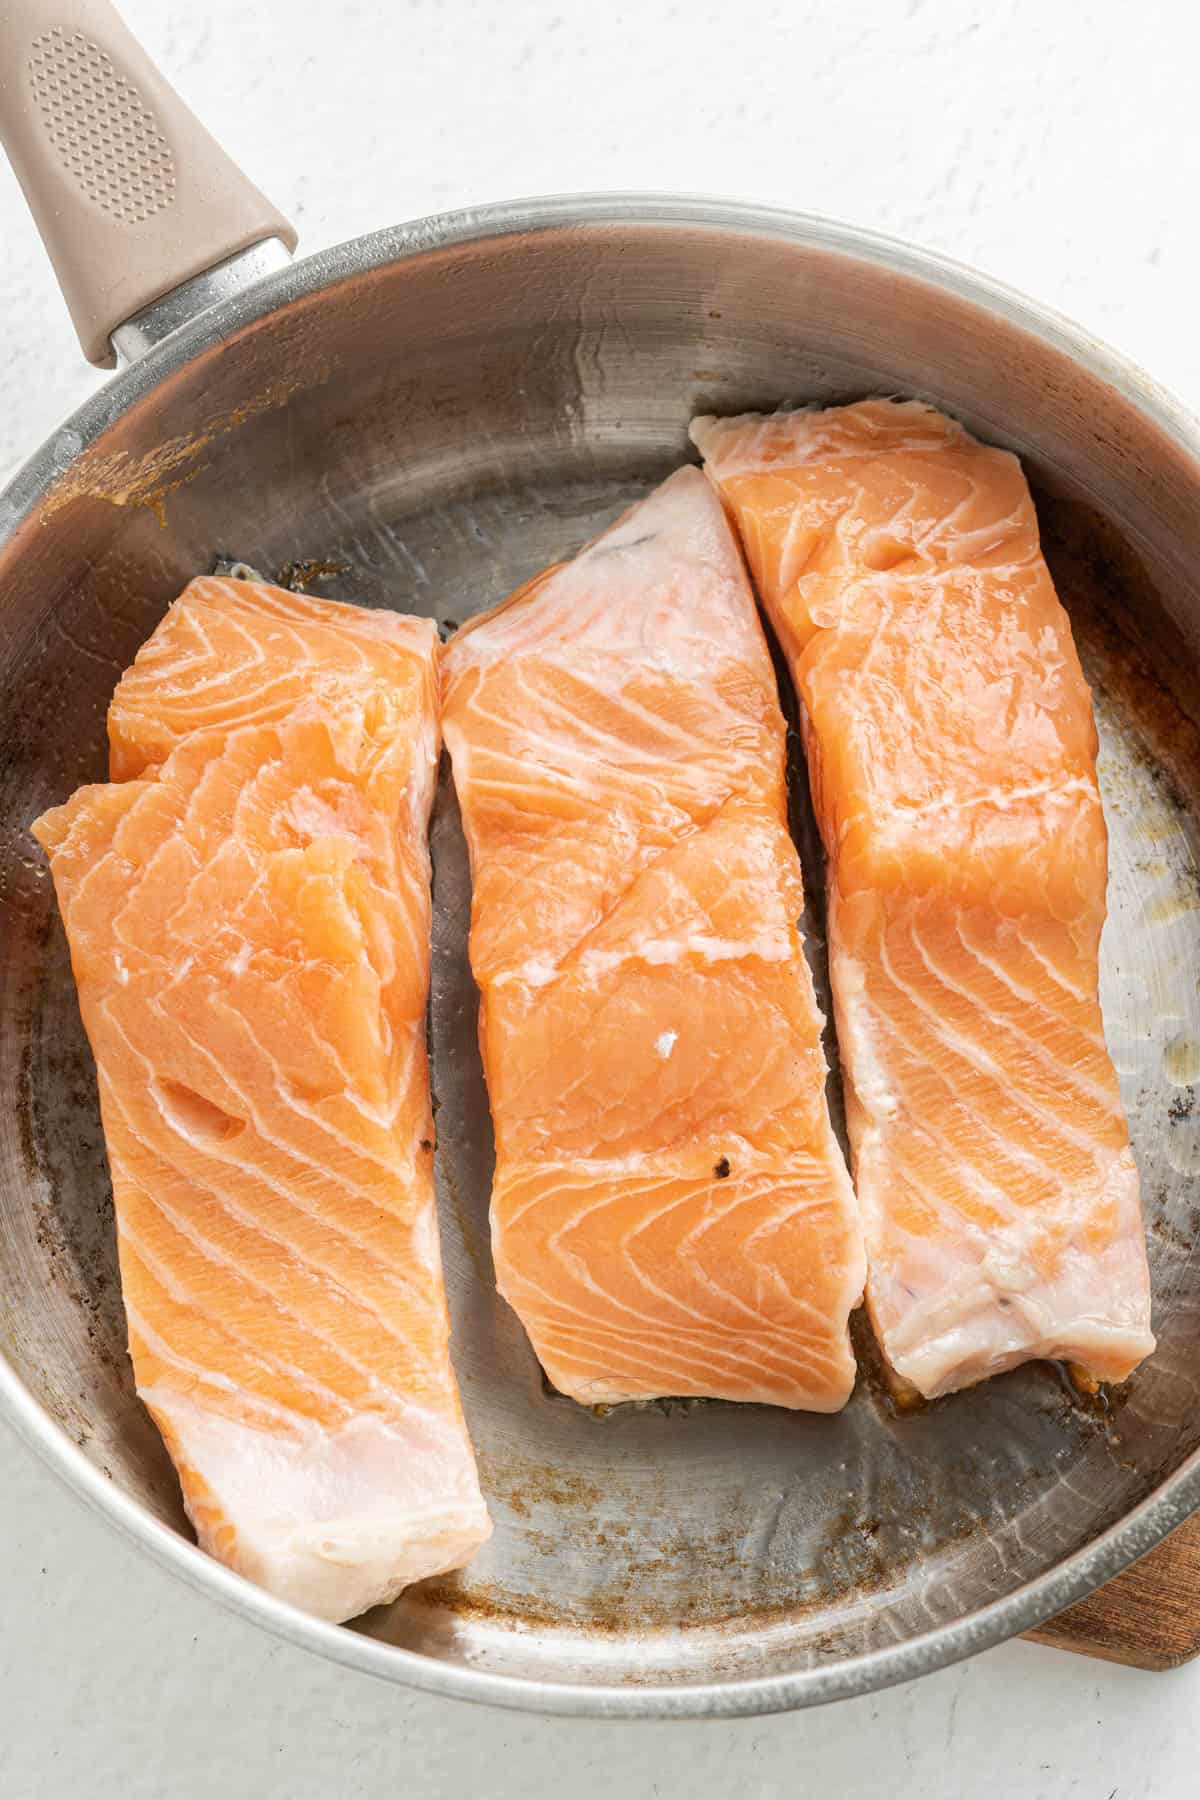 Searing salmon fillets in a large pan.